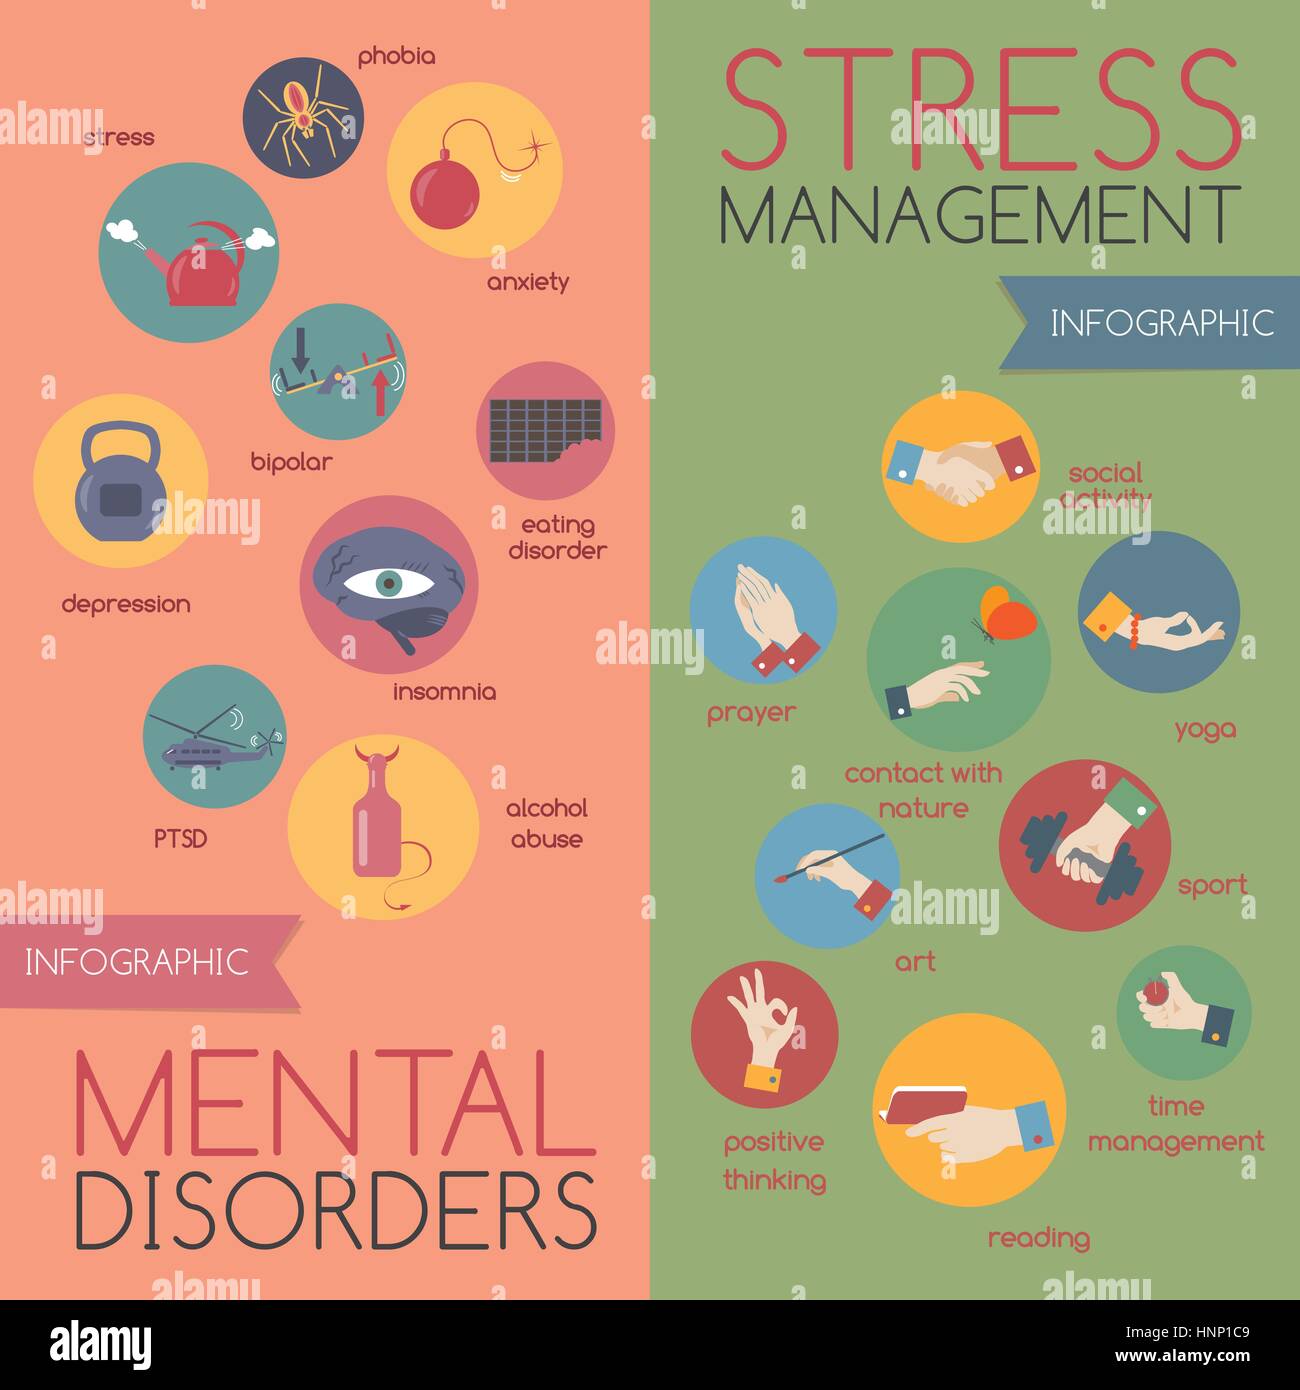 Infographic on mental disorders and stress management  Stock Vector